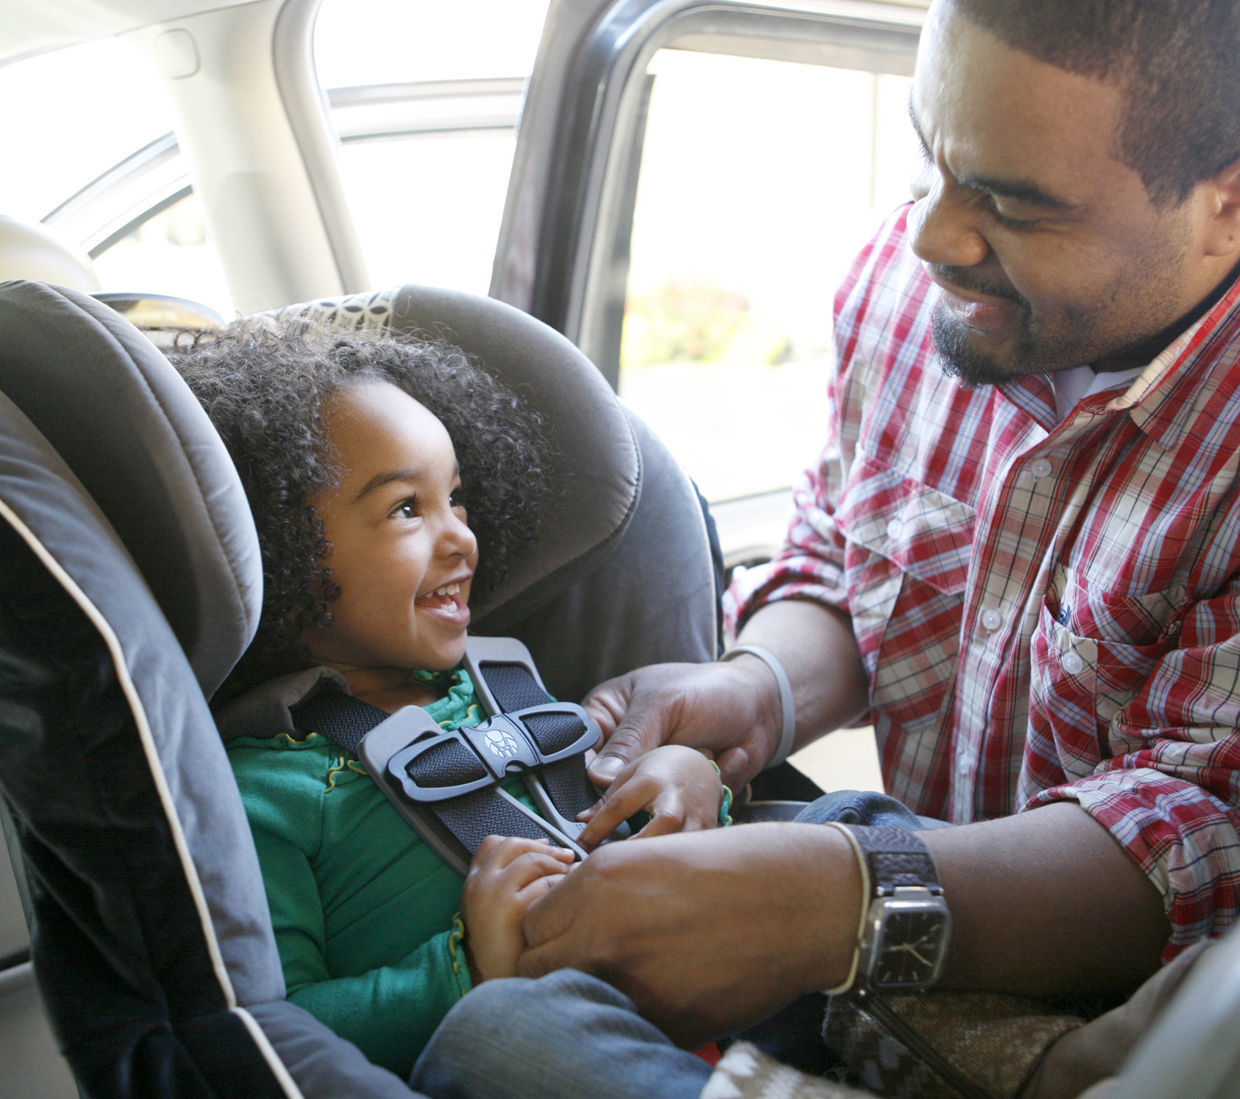 car seat check stations